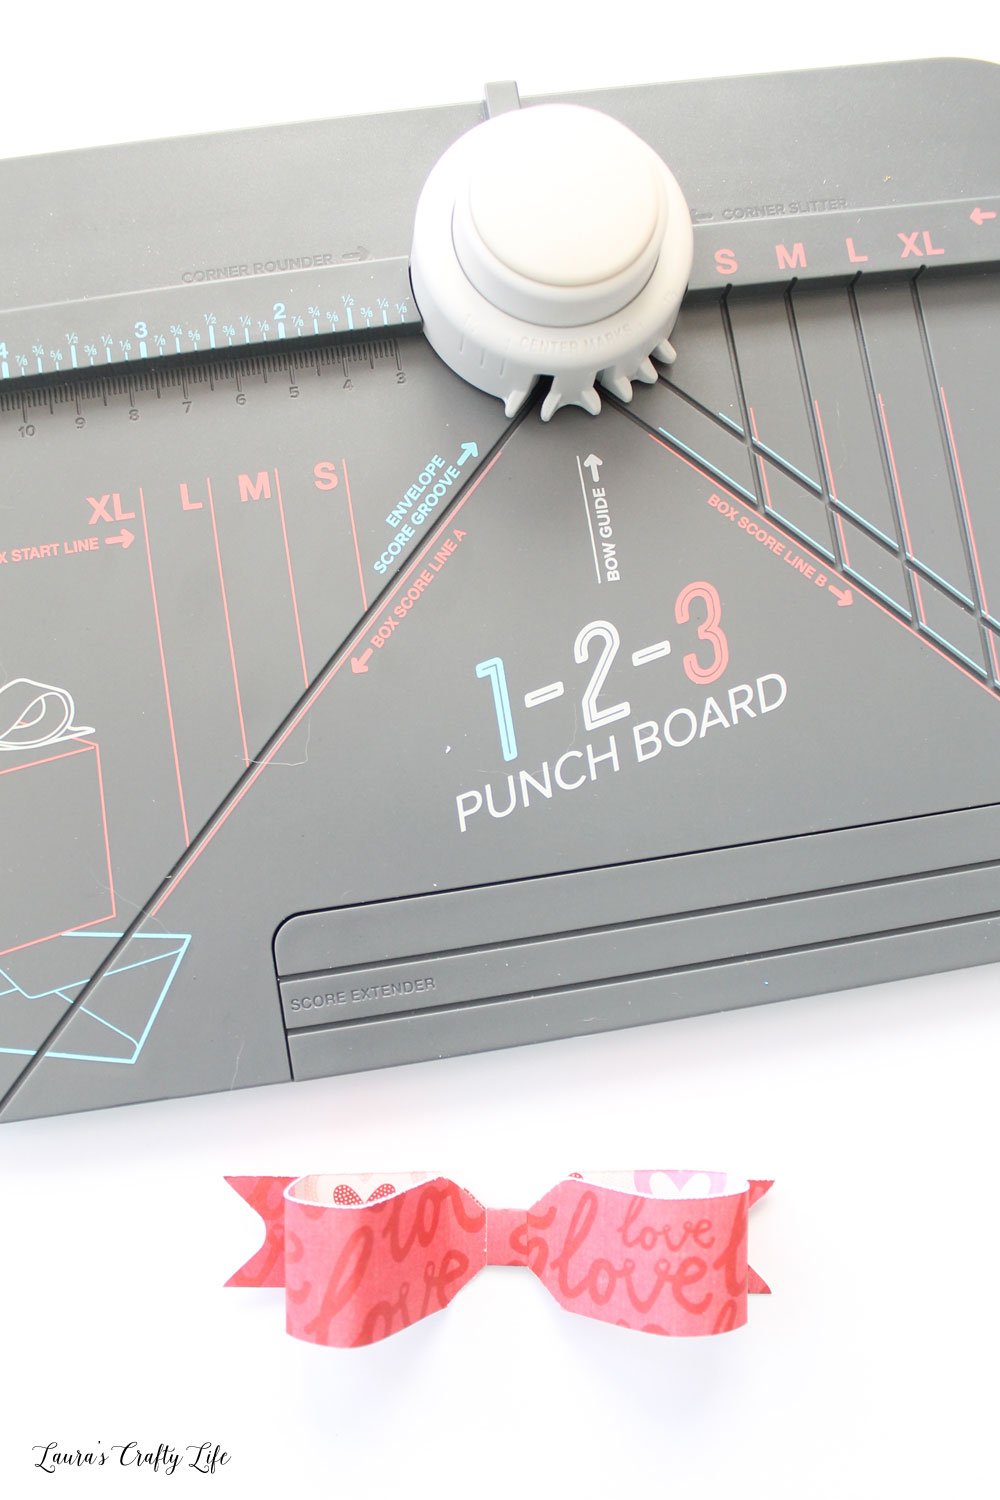 Use the 1-2-3 punch board to create a paper bow